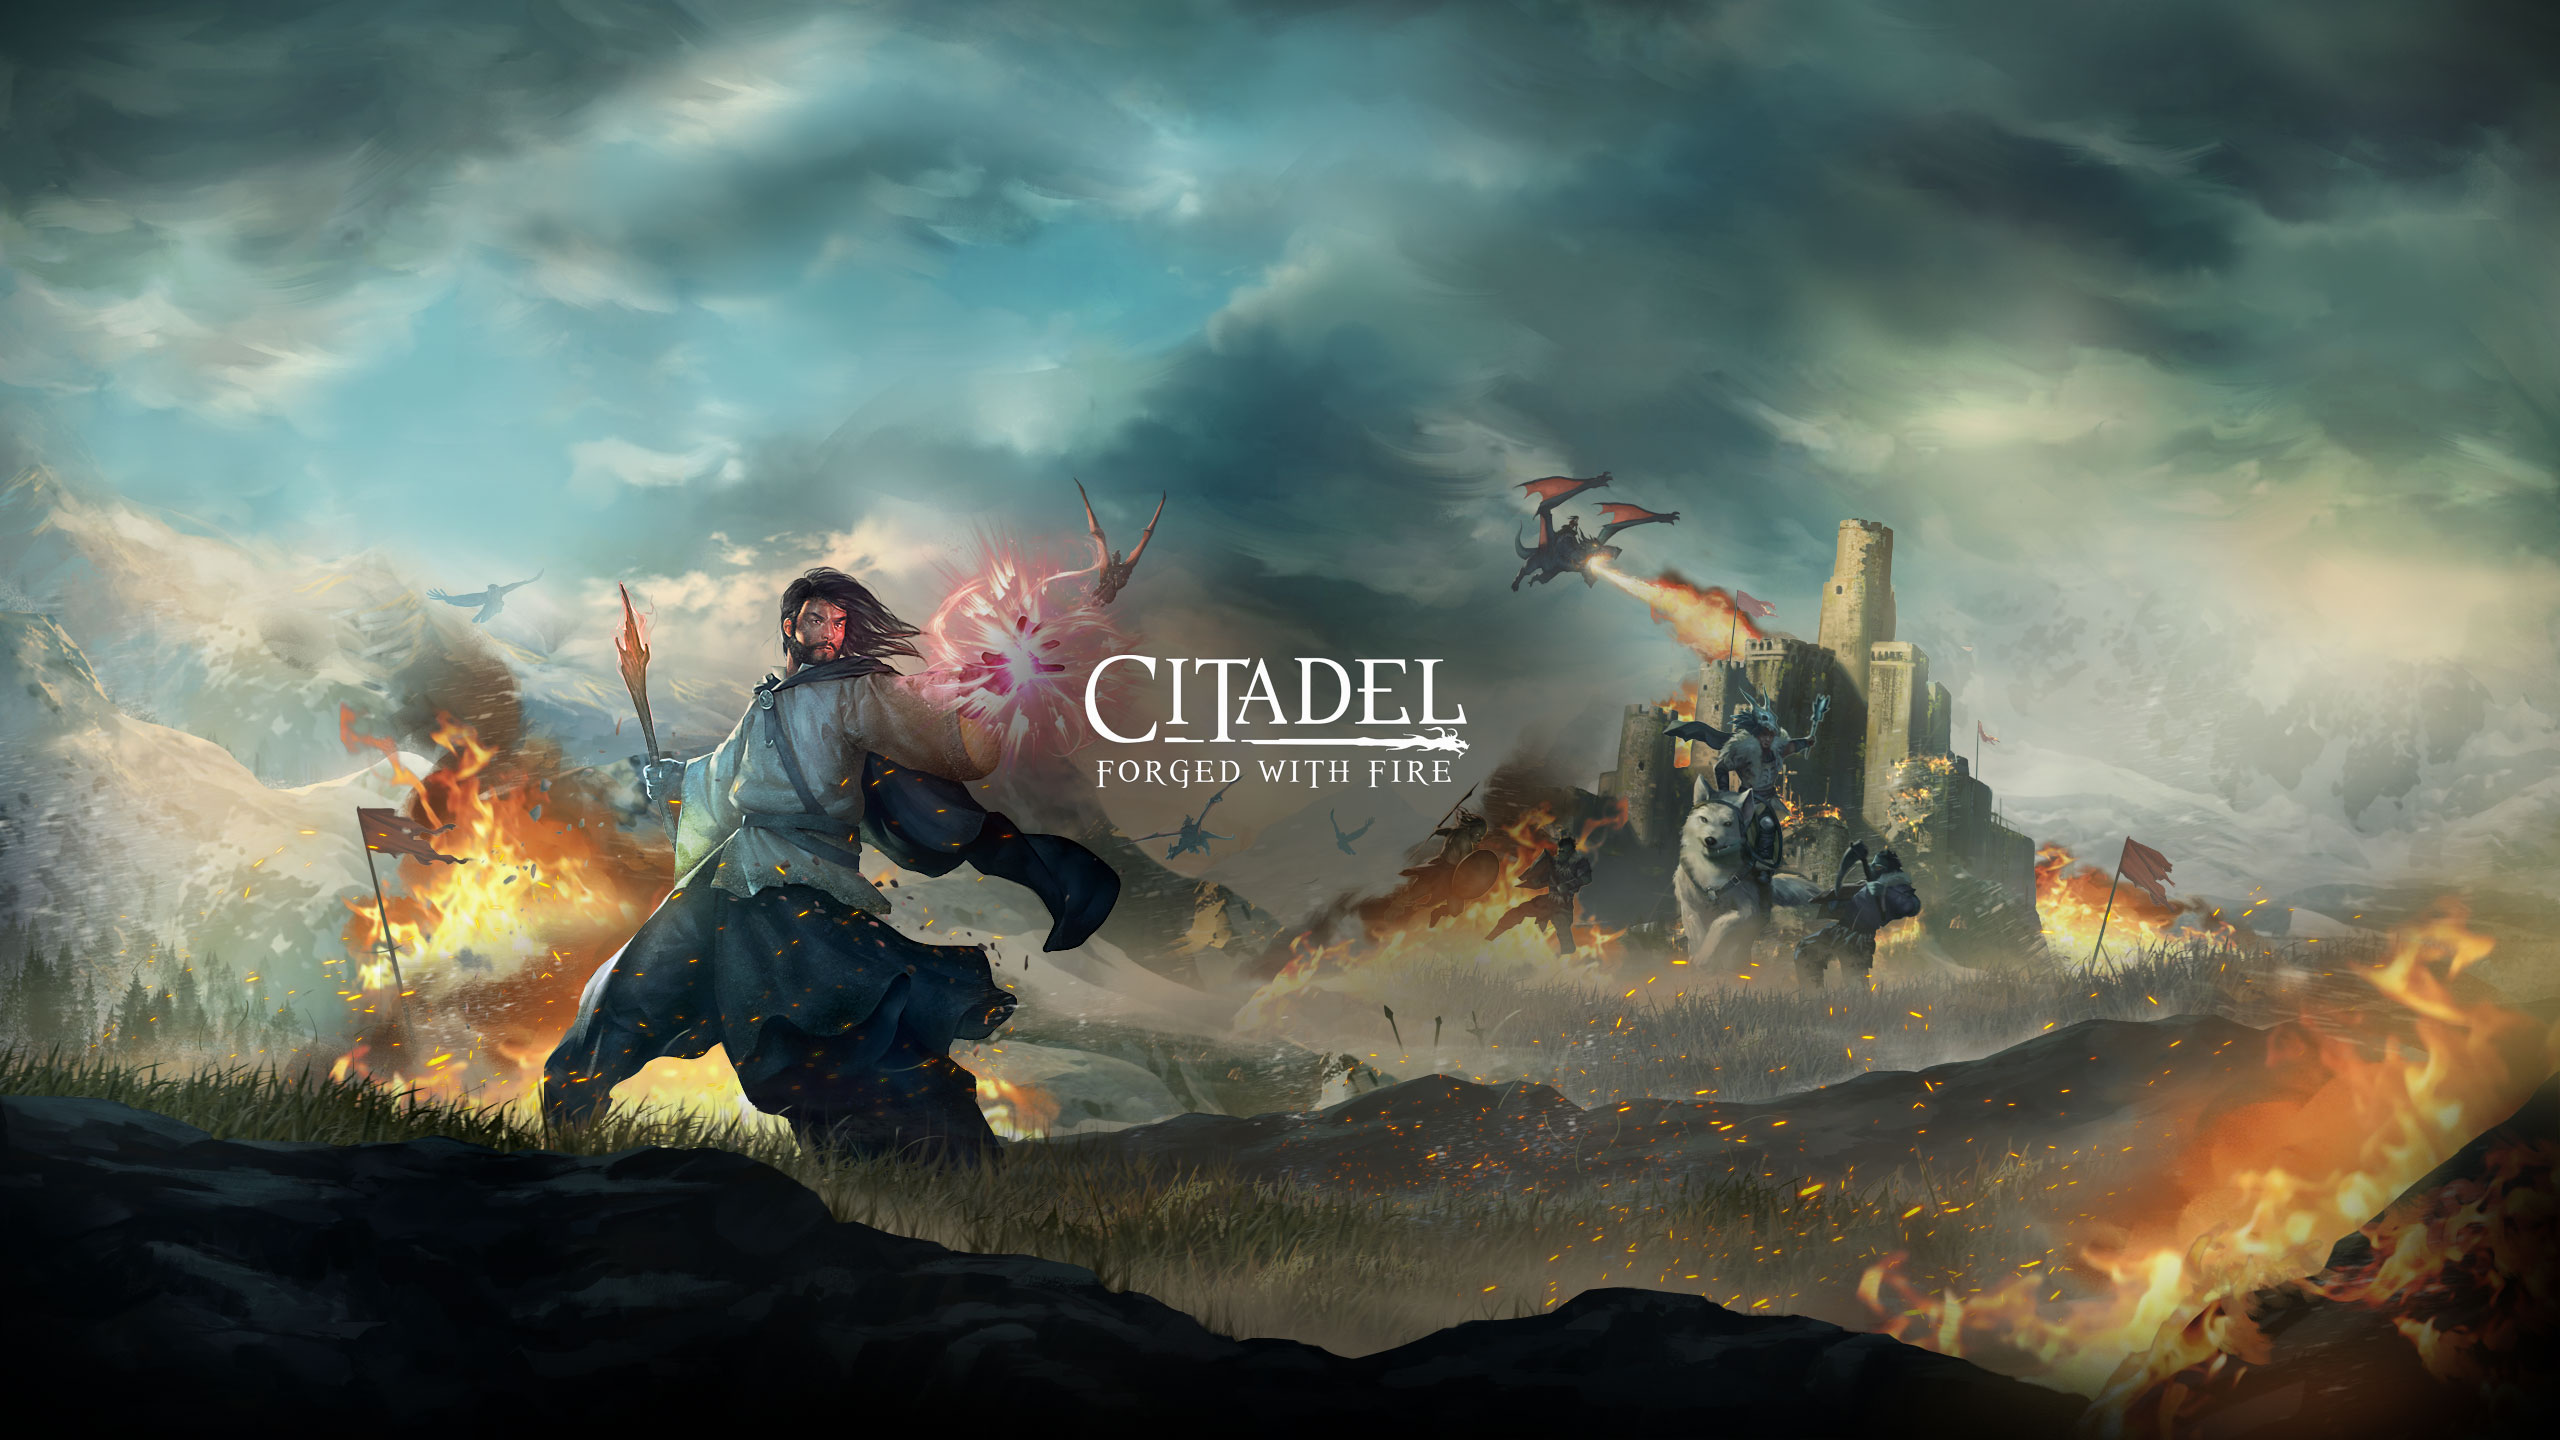 Video Game Citadel: Forged with Fire HD Wallpaper | Background Image